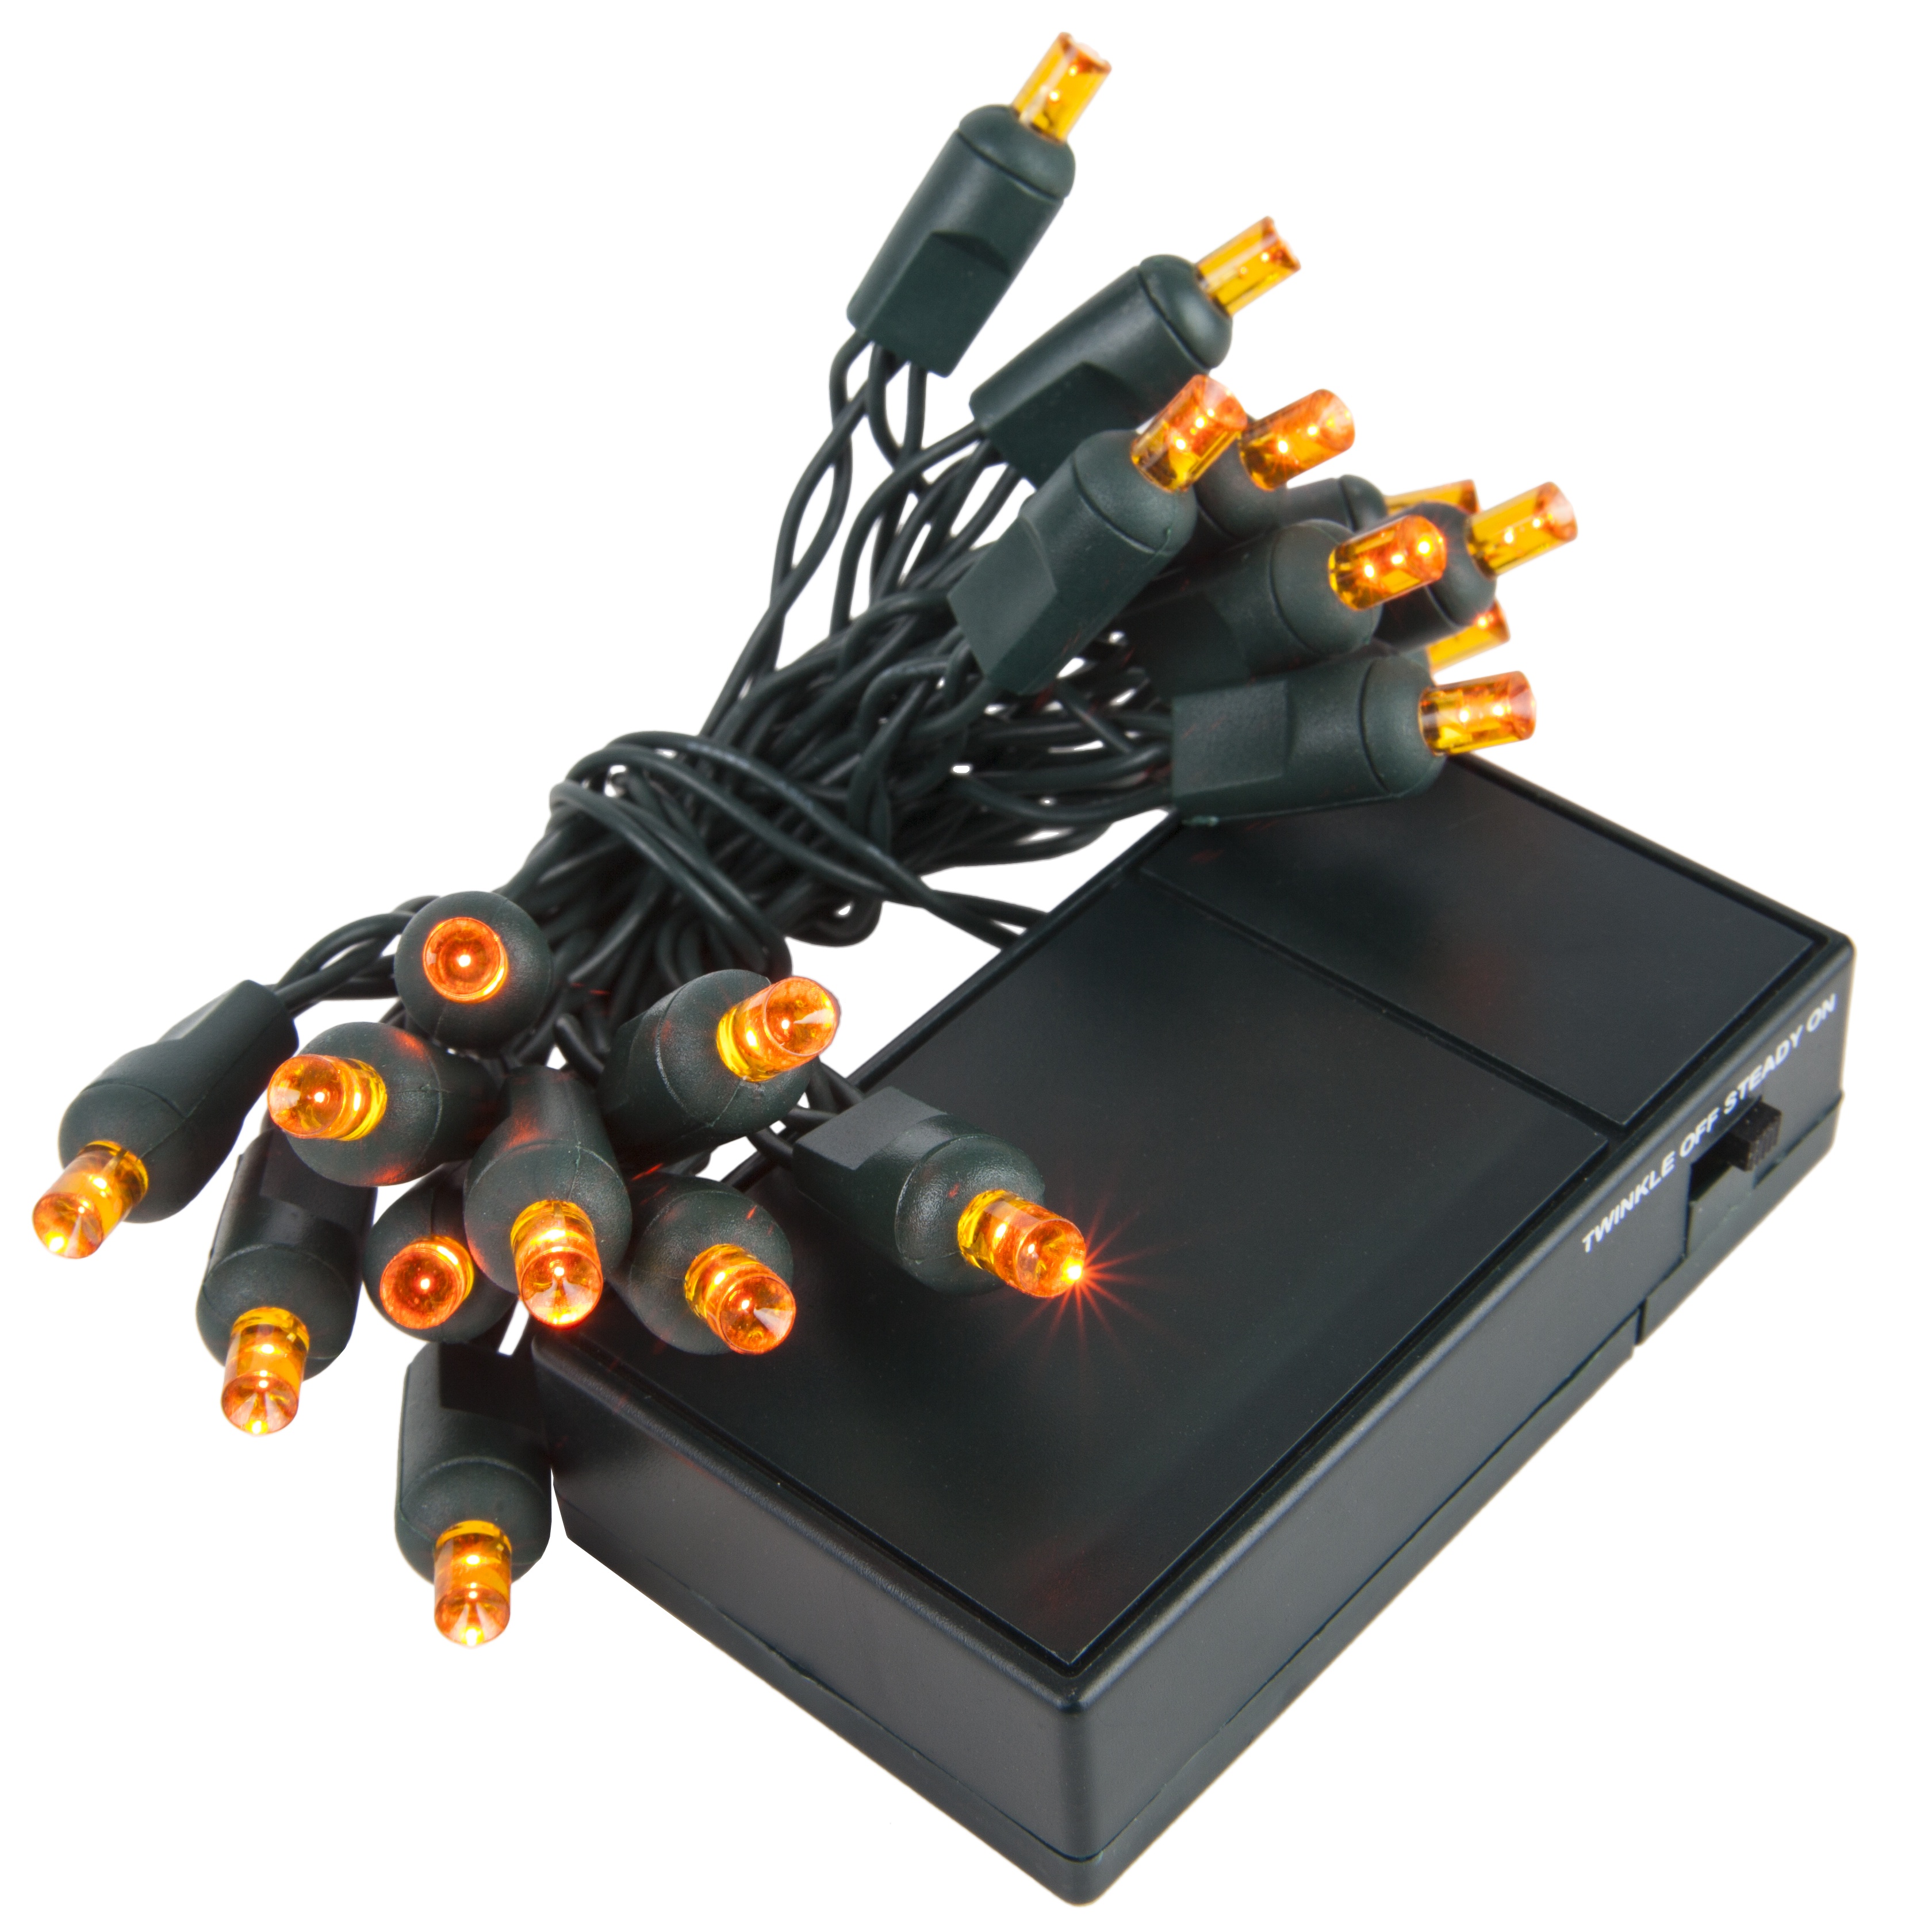 Battery Operated Lights - 20 Amber Battery Operated 5mm LED Christmas ...